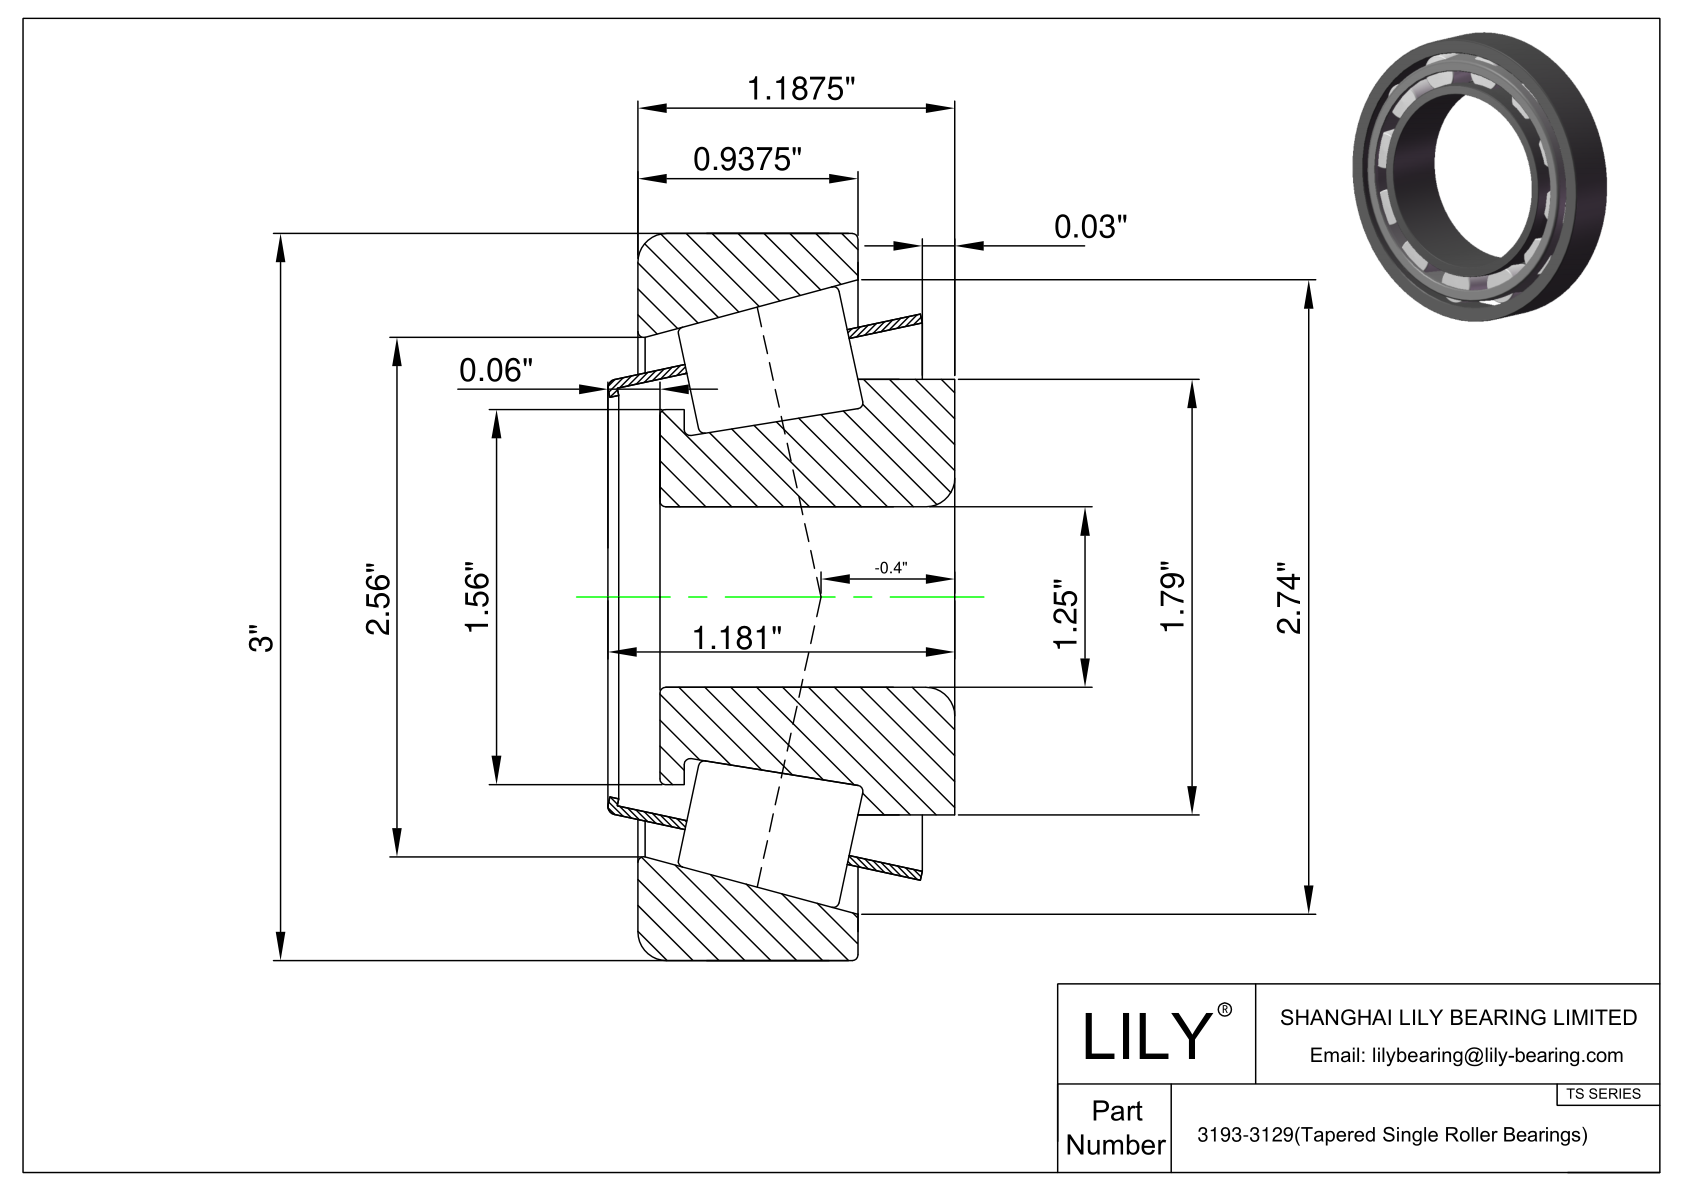 3193-3129 TS (Tapered Single Roller Bearings) (Imperial) cad drawing